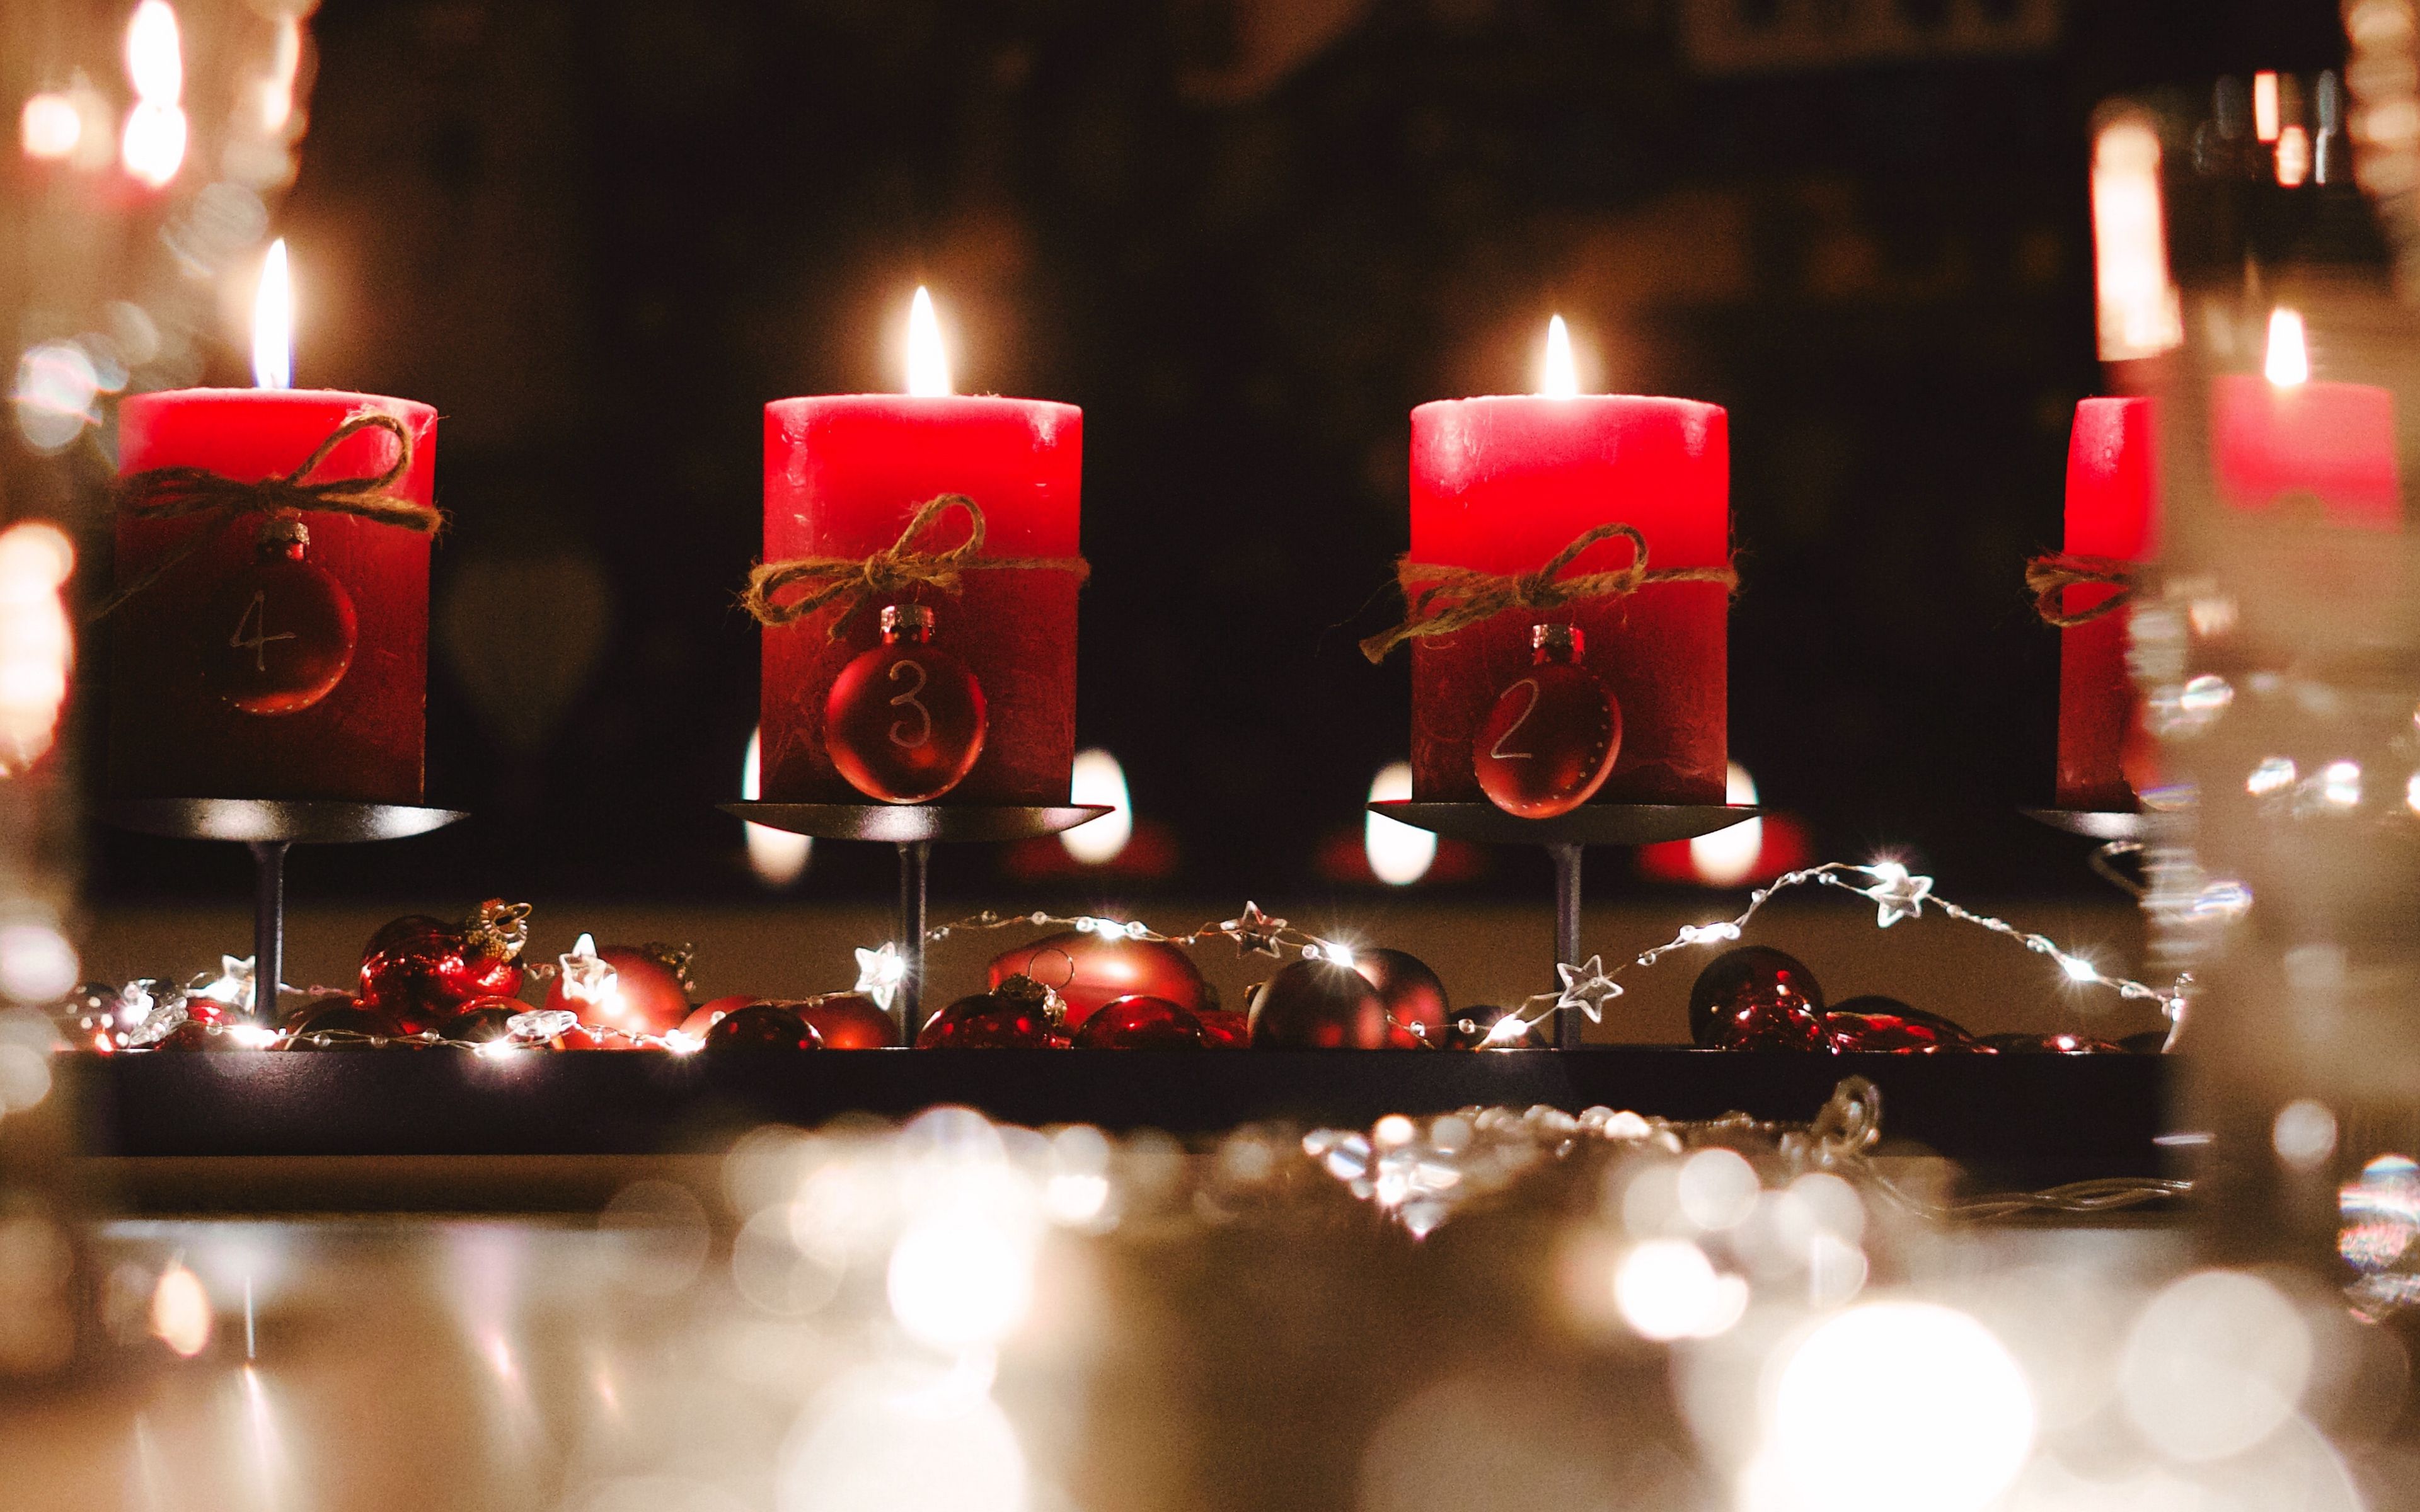 Download wallpaper 3840x2400 candles, decorations, garlands, holiday ...